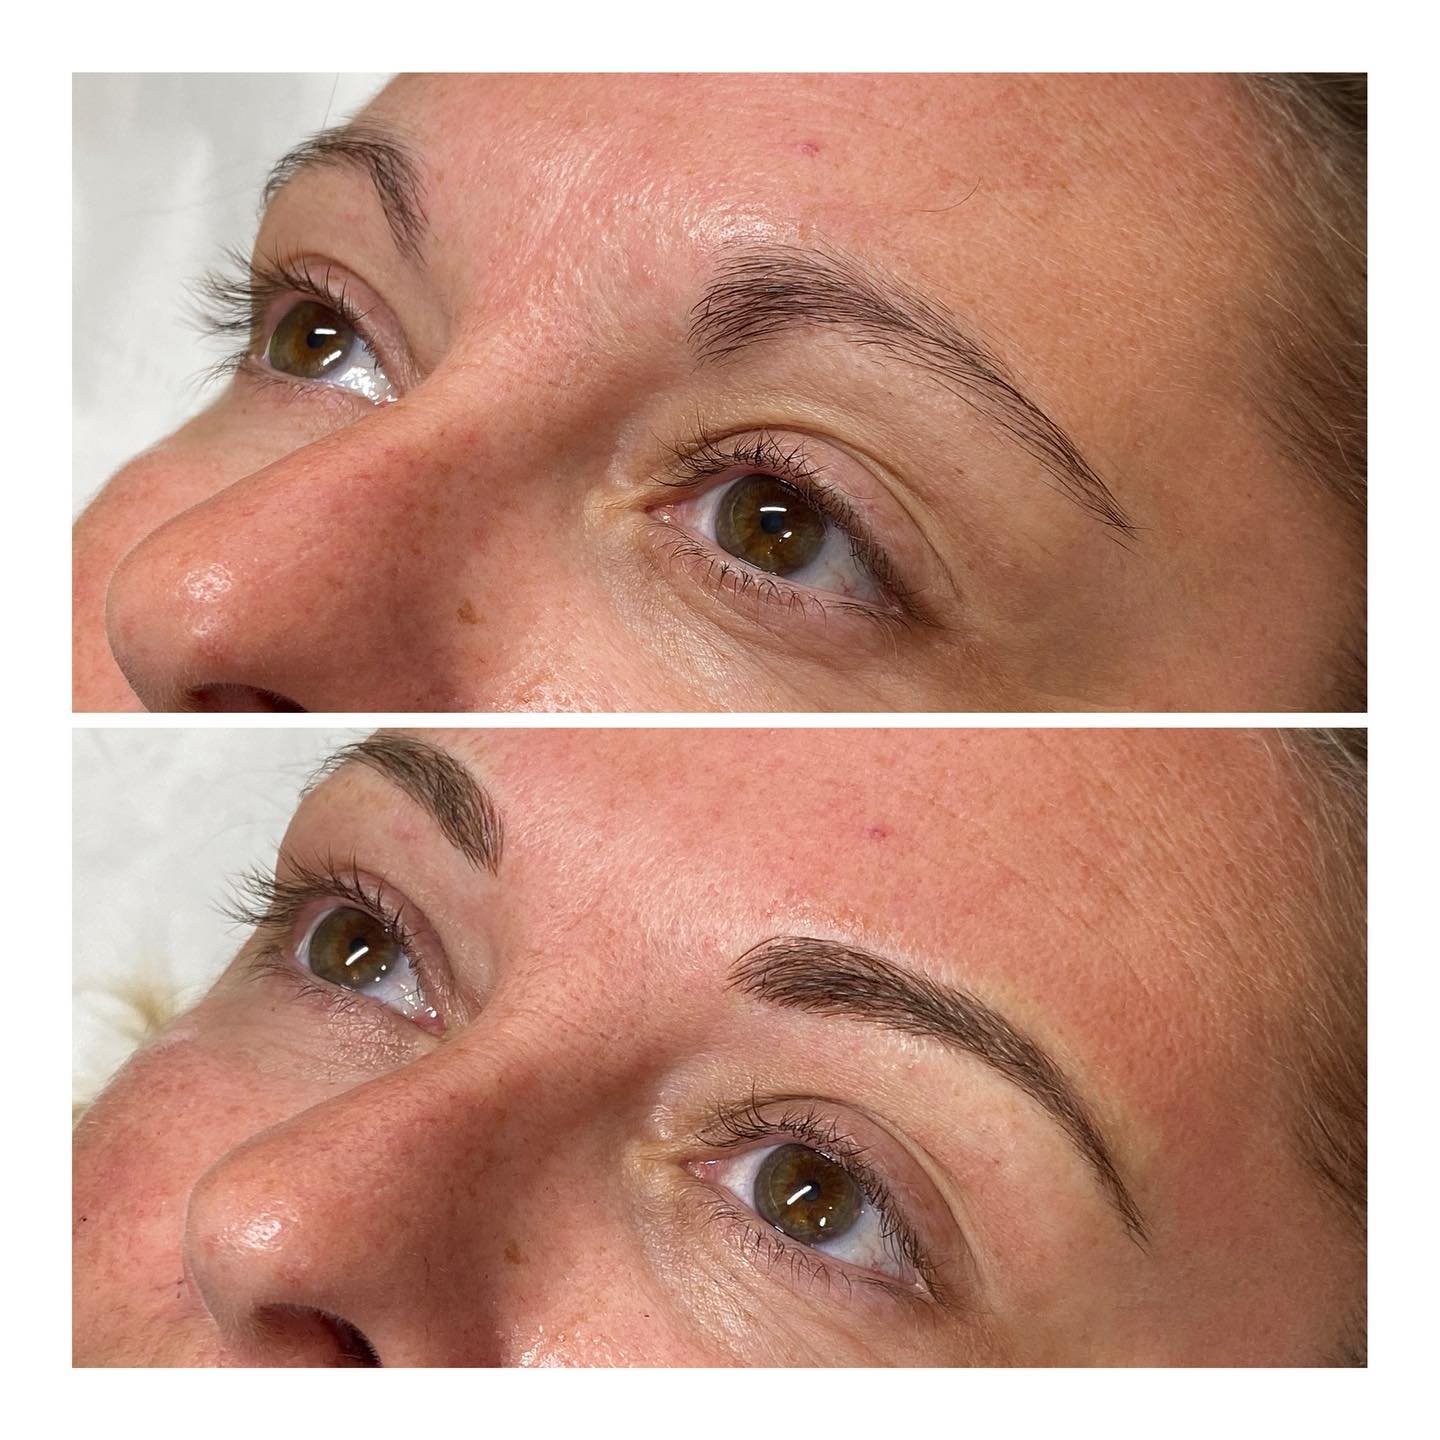 What a difference the correct brow shape can make #prettybrows #microblading #kbpro #greatpigments #jerseyci